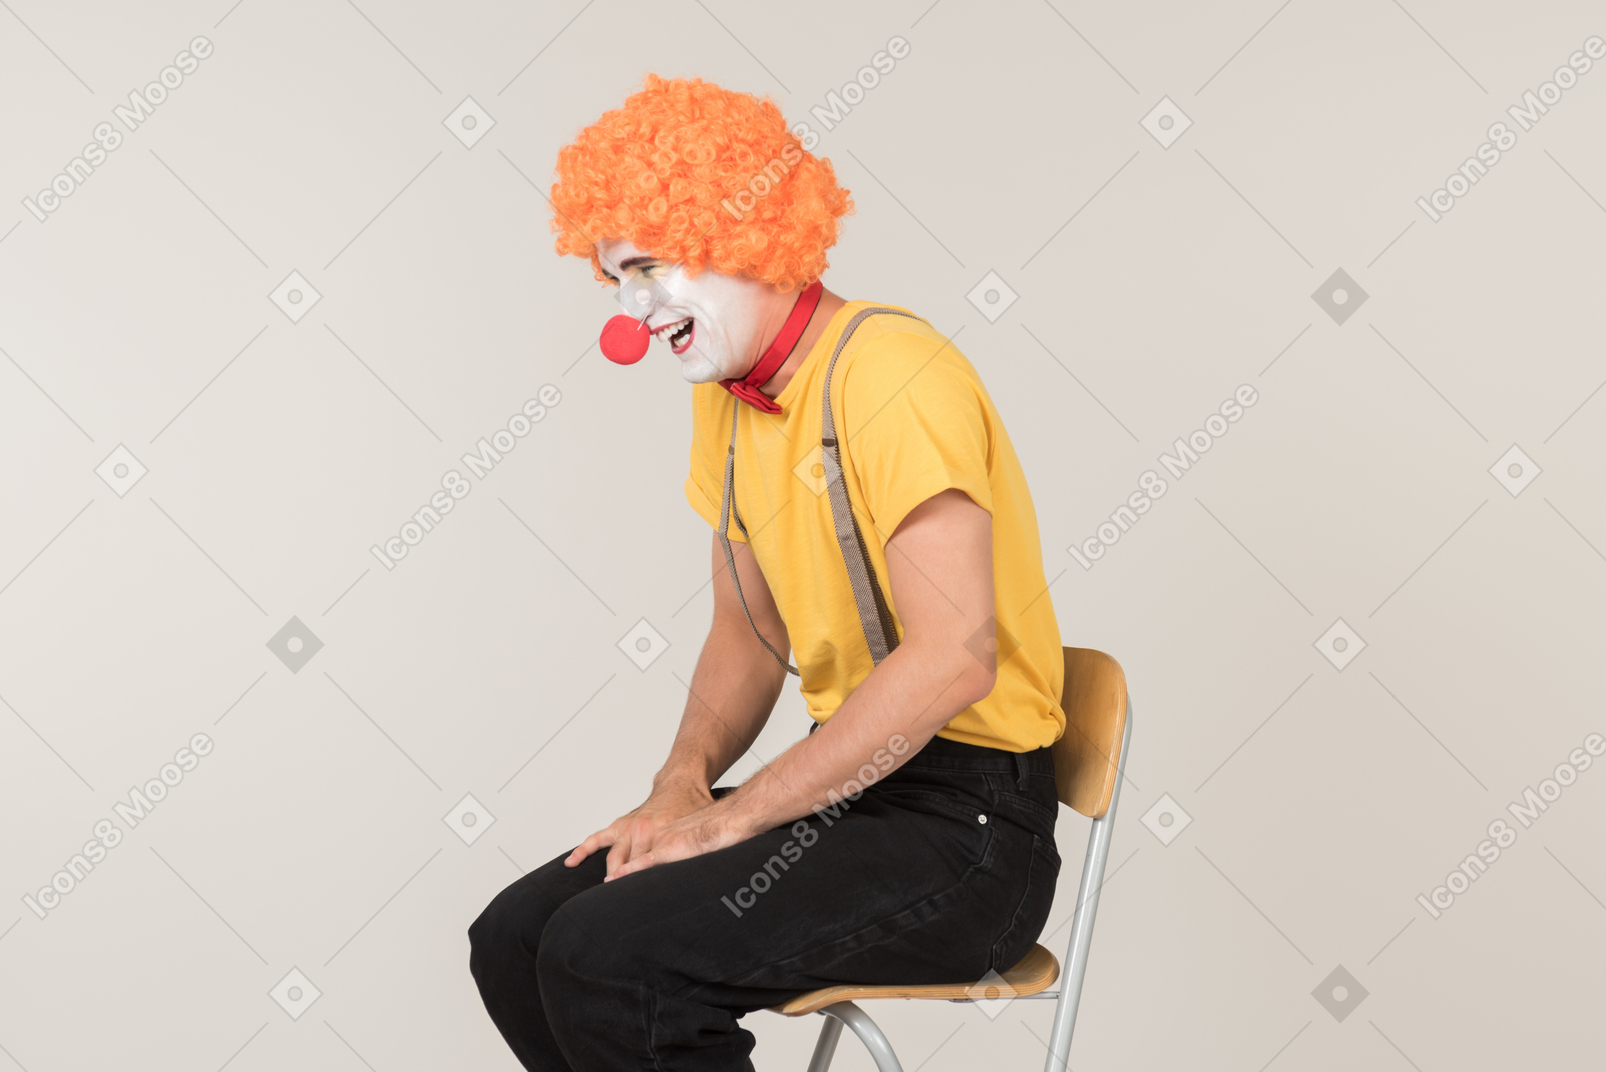 Sad looking male clown sitting on the chair and crying